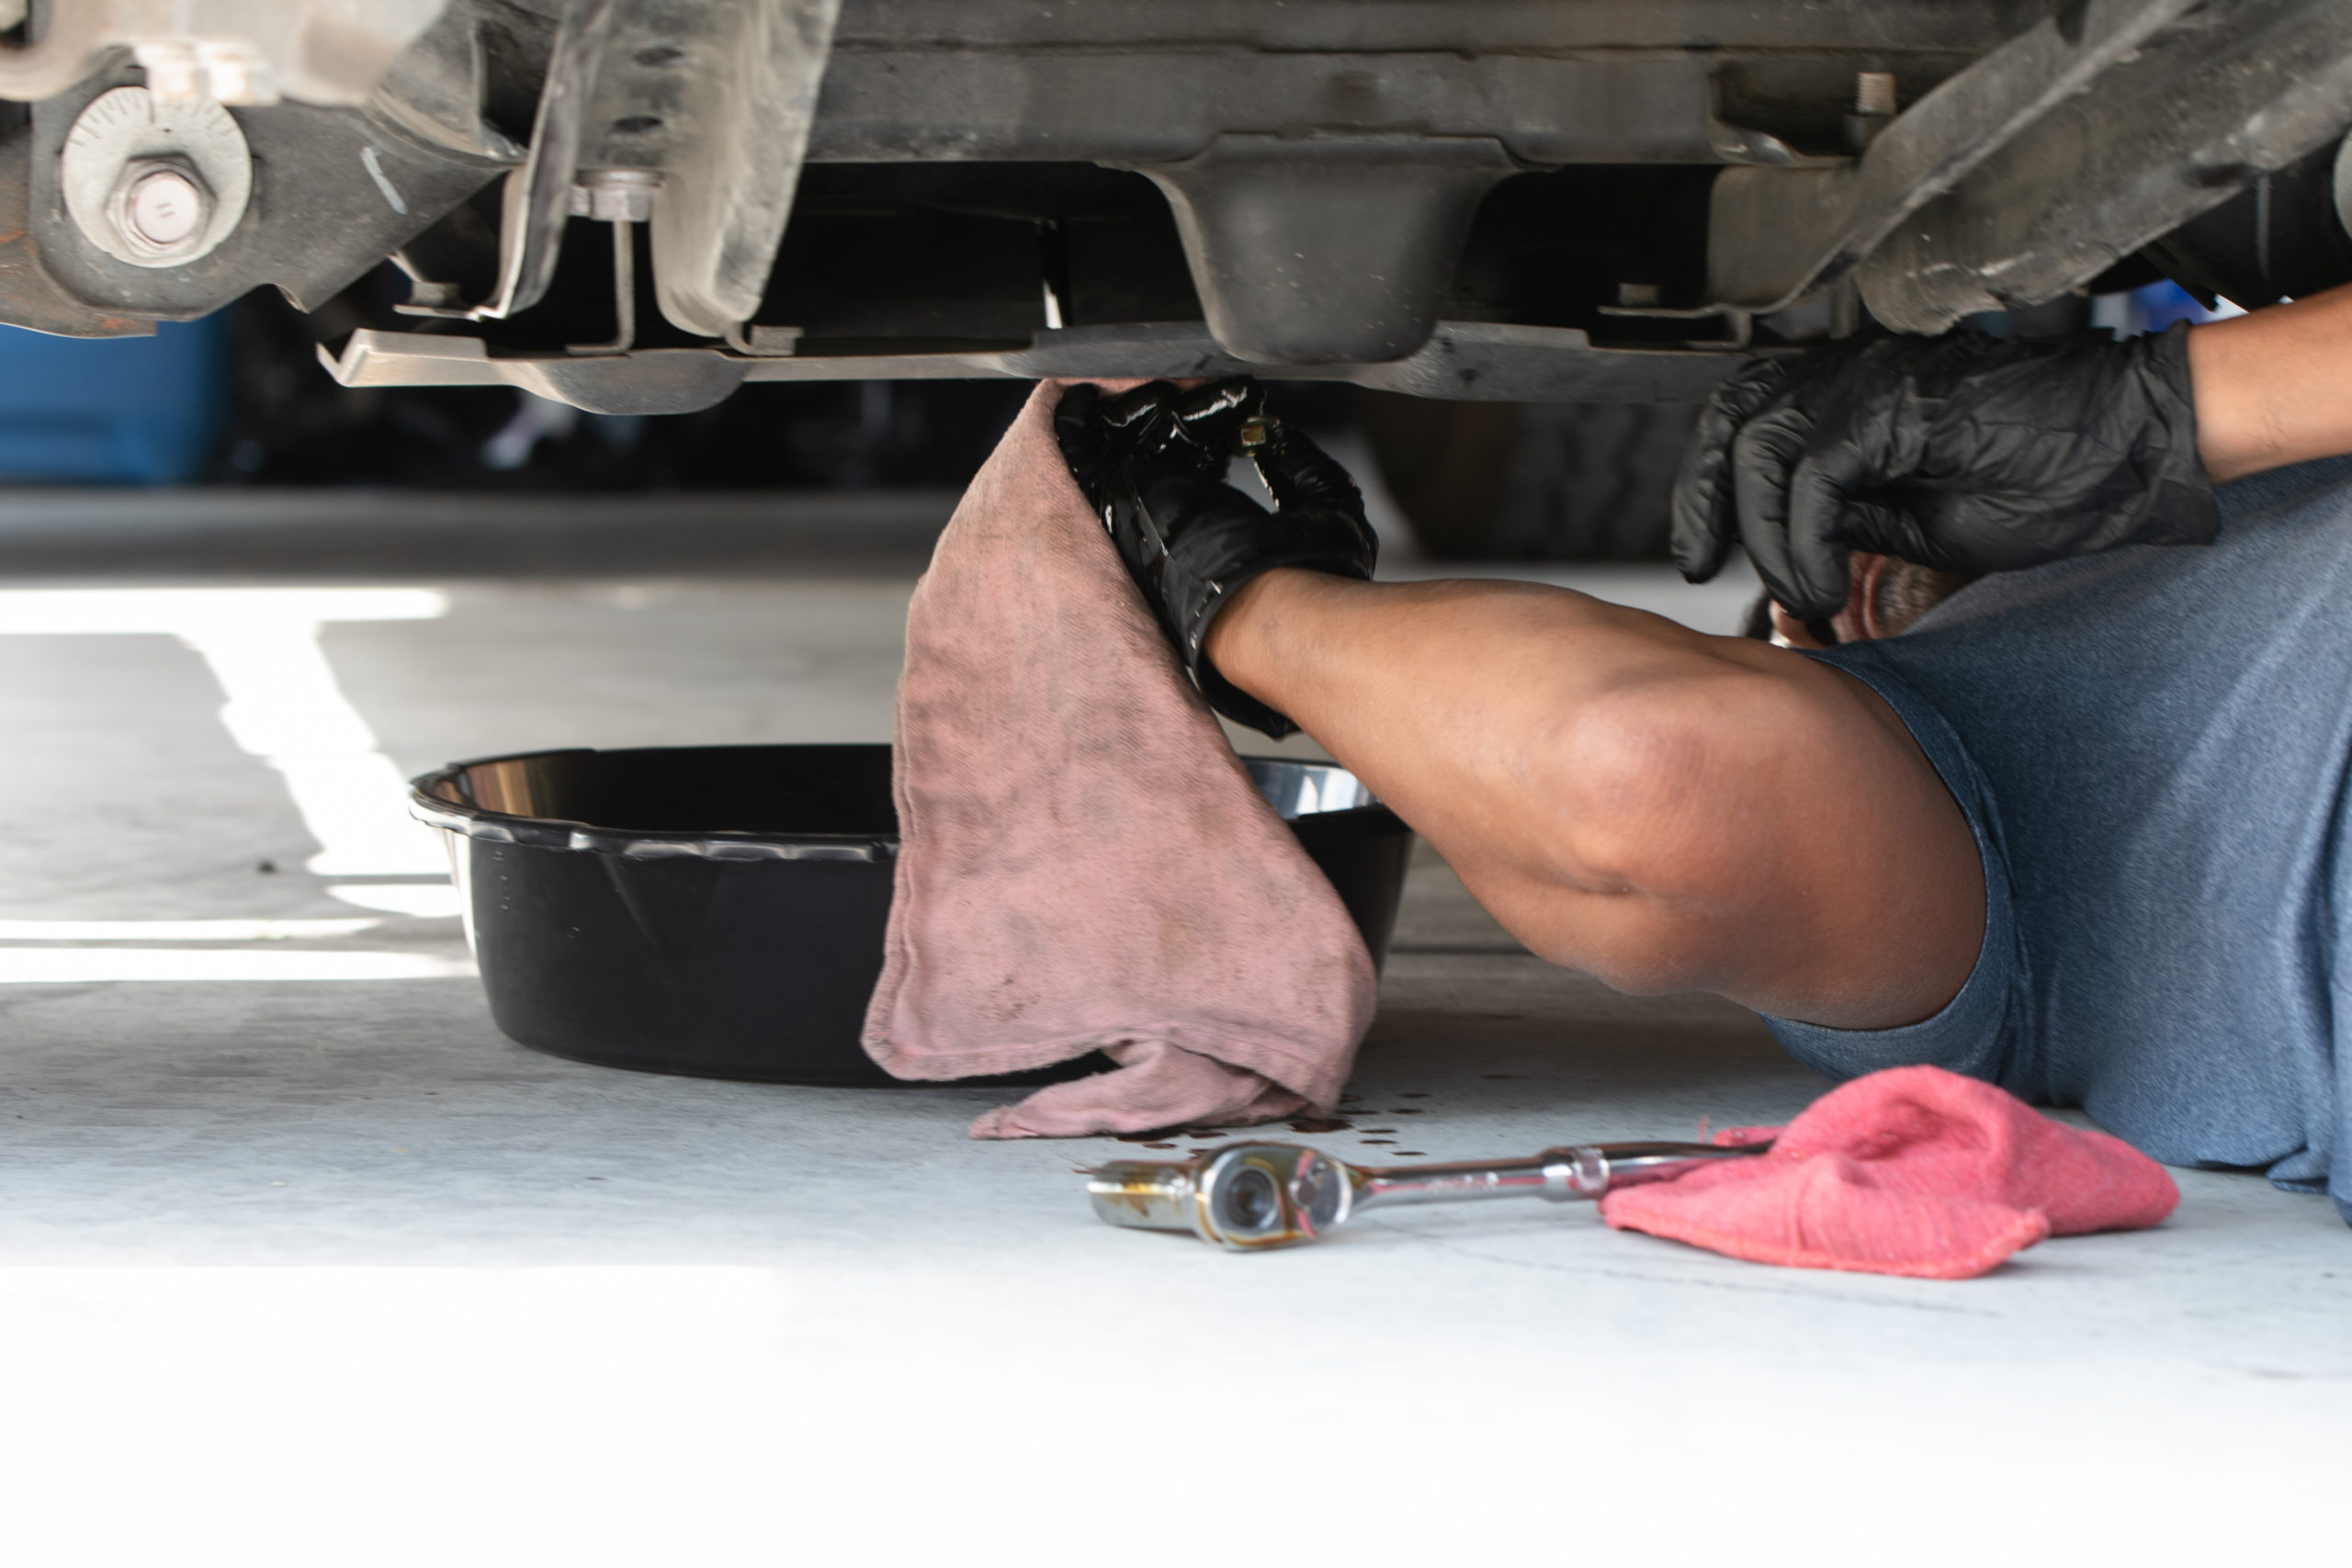 Car Leaking Oil? How to Fix Engine Oil Leaks at Home - AutoZone